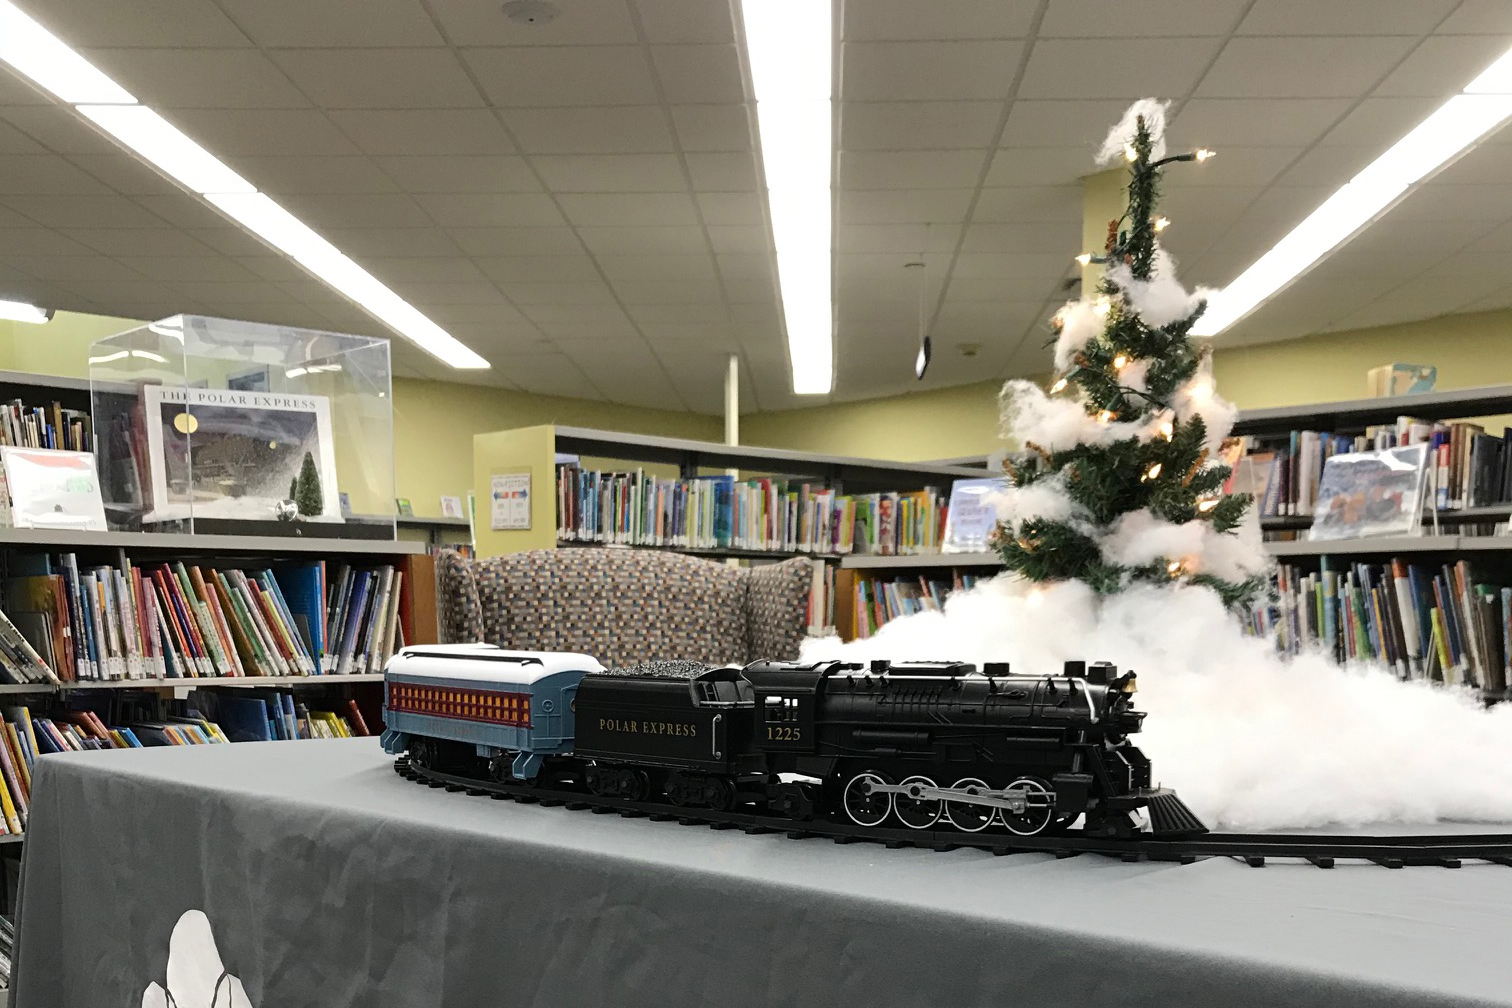 Polar Express train in the childrens area of Veterans Memorial Library